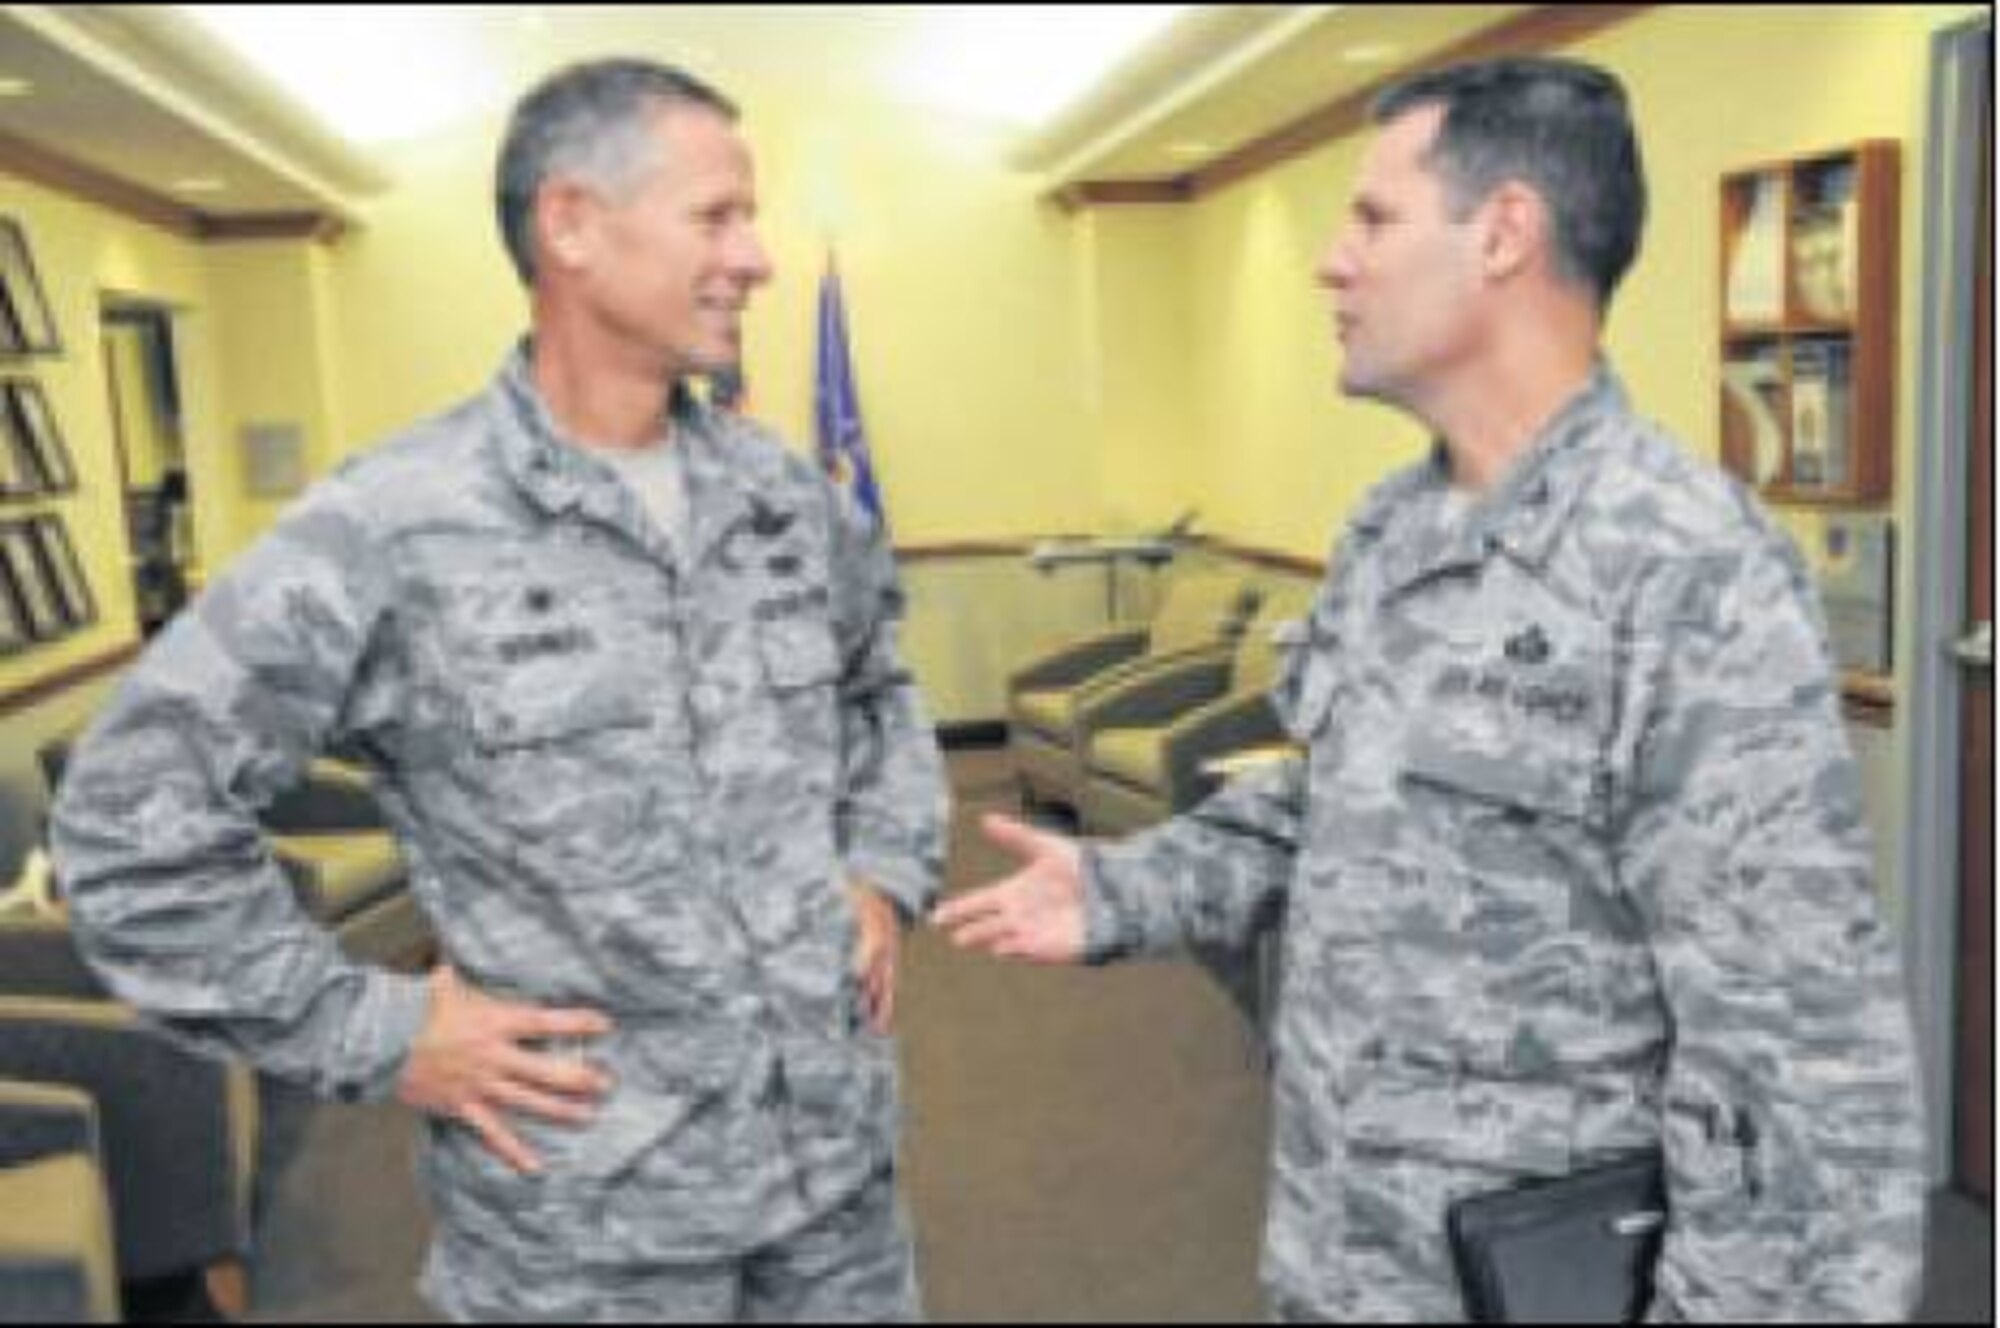 Col. John Devillier, 88th Air Base Wing commander, (right) and Col. Gregory Schnulo, 178th Wing commander, meet at Springfield Air National Guard Base on Oct. 29. Leaders from the 88th visited Springfield to gain a better understanding of the 178th Wing’s missions and strengthen their existing partnership. (Ohio Air National Guard photo by Senior Master Sgt. Joseph Stahl)